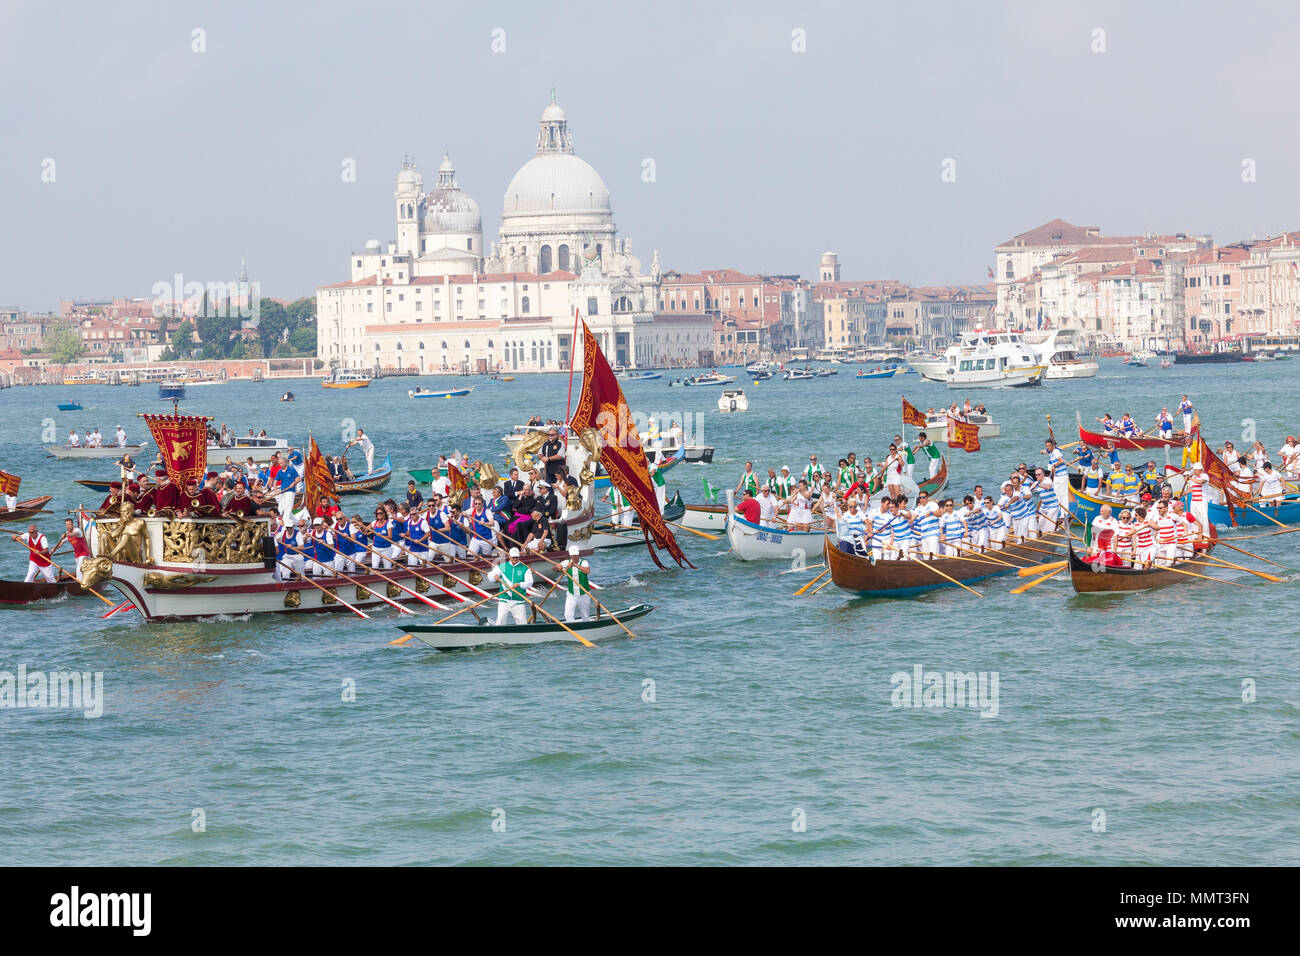 Venice, Veneto, Italy.  13th May 2018. View of St Marks Basin with the cortege of rowers in the boats accompanying the Serenissama ceremonial boat with the dignitaries to Lido during Festa de la Sensa for the blessing of the gold ring which is then tossed into the lagoon marrying Venice to the sea. Credit Mary Clarke/Alamy Live News Stock Photo